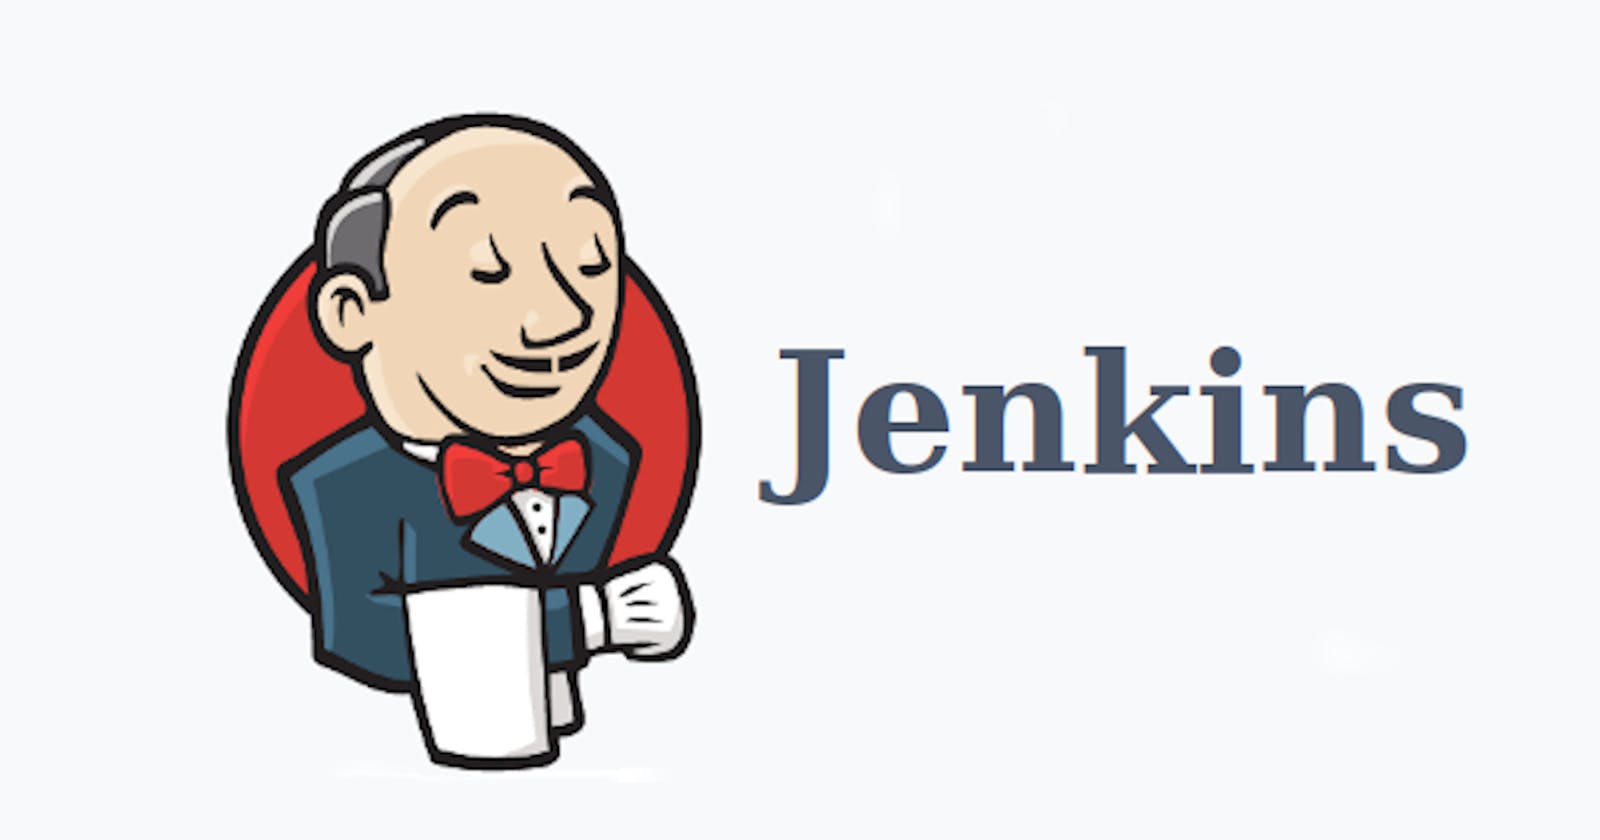 Getting Started with Jenkins: Installation and Setup